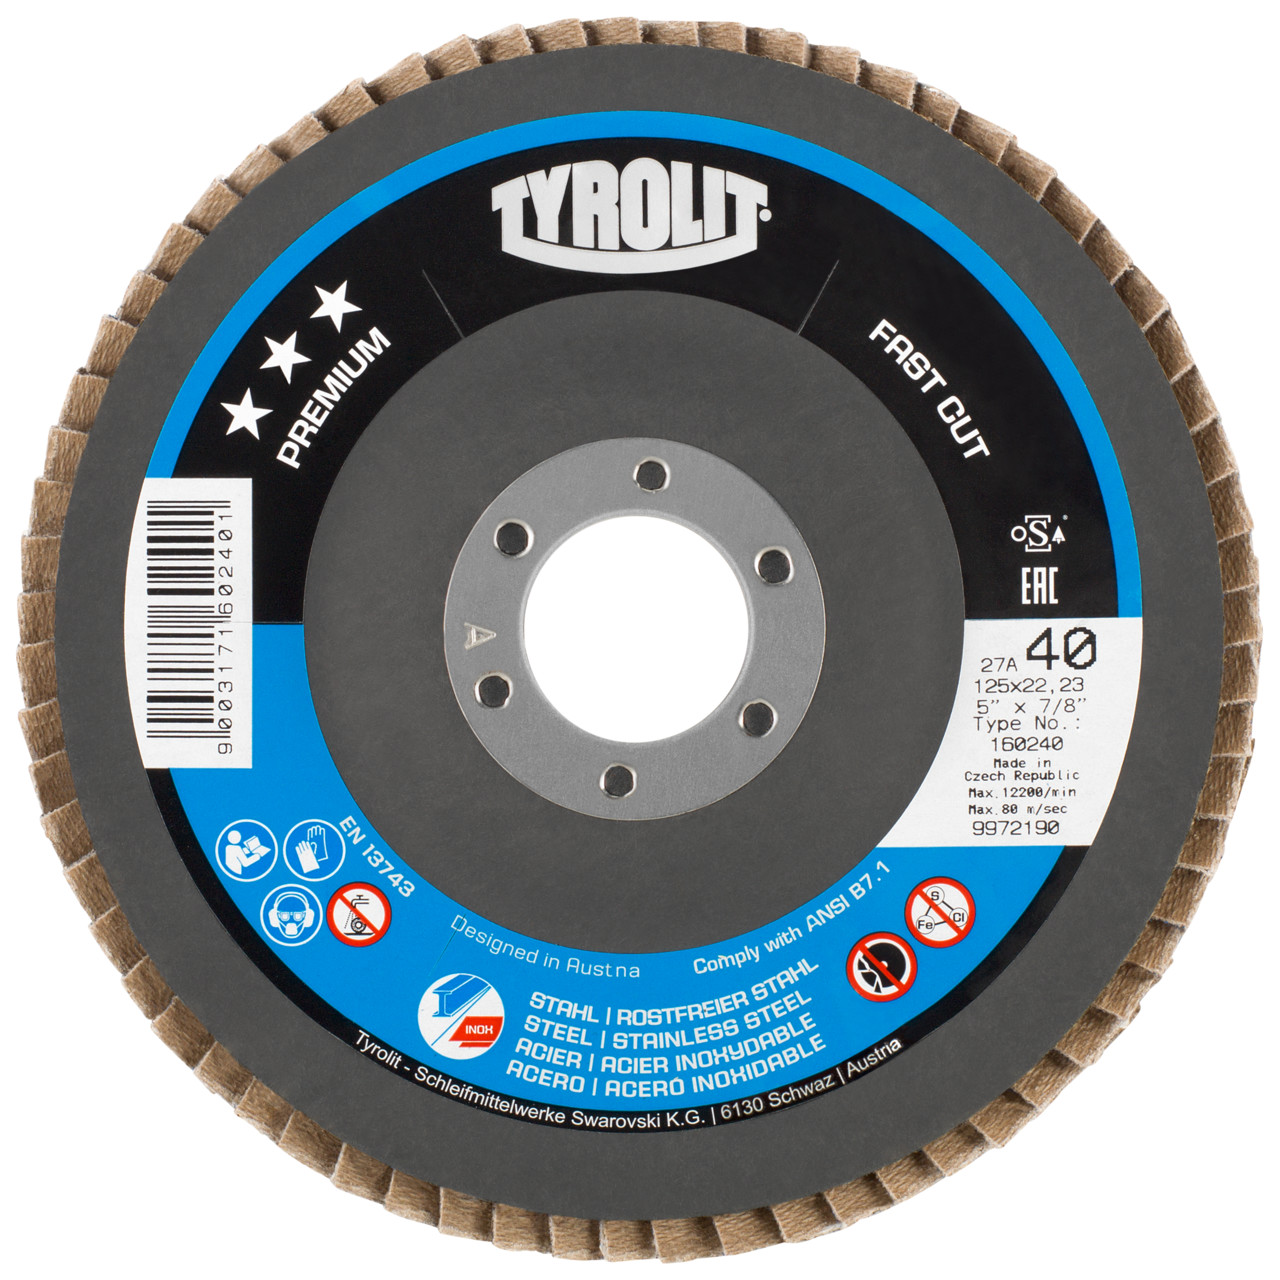 Tyrolit Serrated lock washer DxH 115x22.2 FASTCUT for steel &amp; stainless steel, P80, shape: 28A - straight version (glass fibre carrier body version), Art. 160252